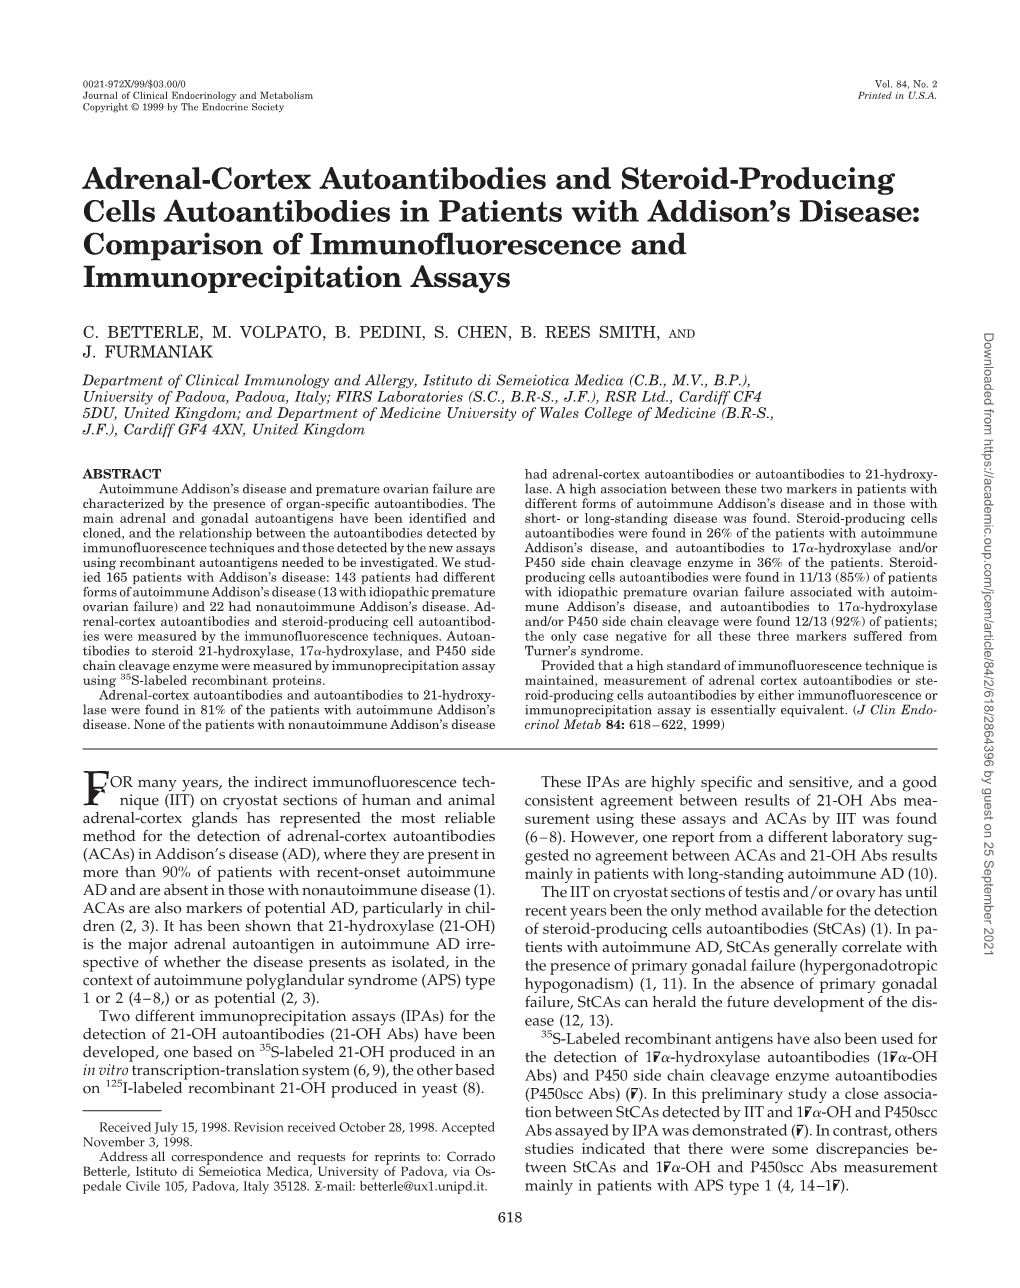 Adrenal-Cortex Autoantibodies and Steroid-Producing Cells